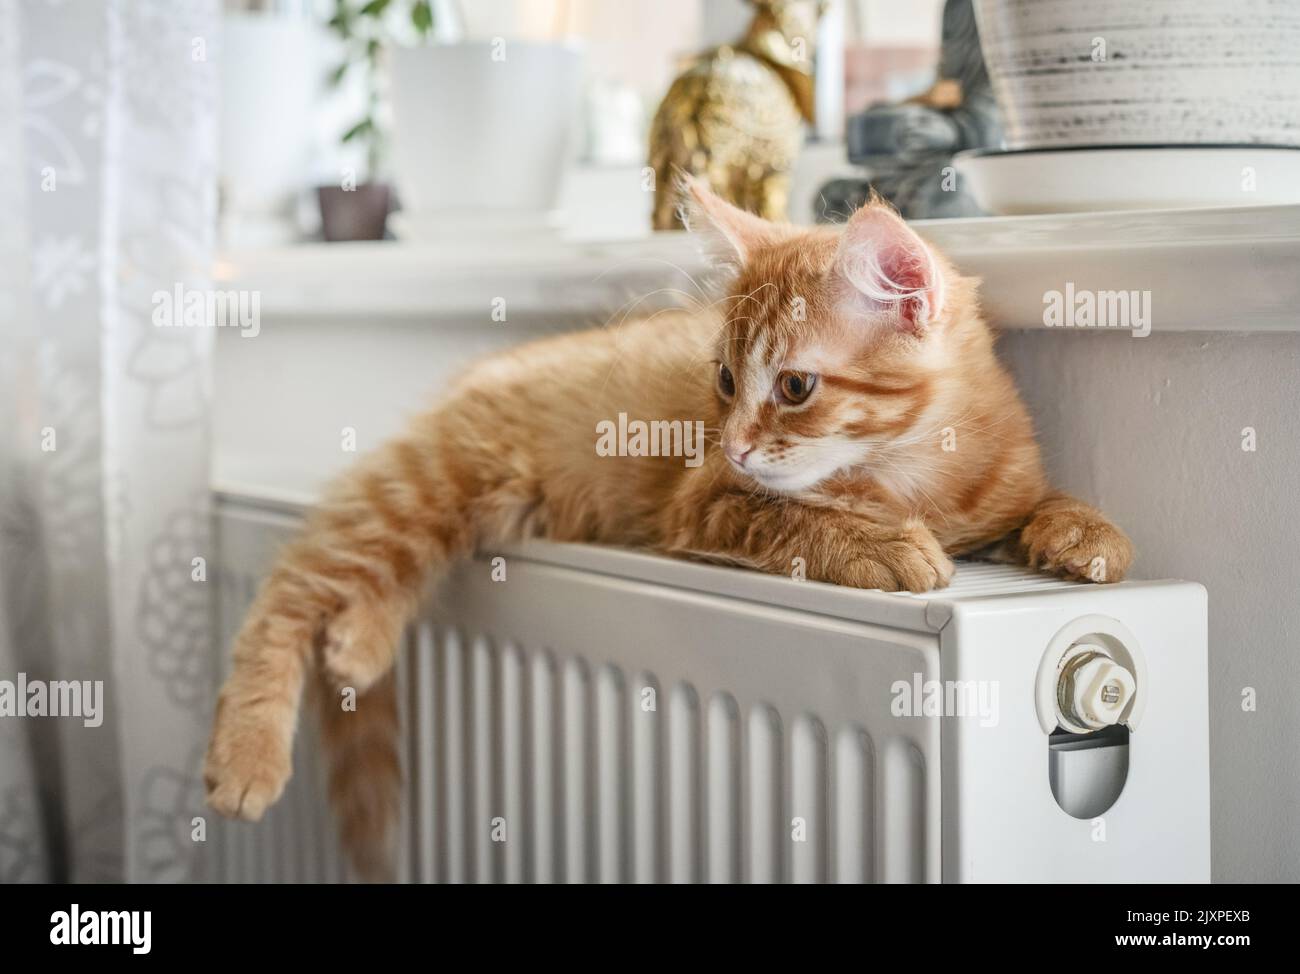 Cute little ginger kitten with amber eyes relaxing on the warm radiator closeup Stock Photo